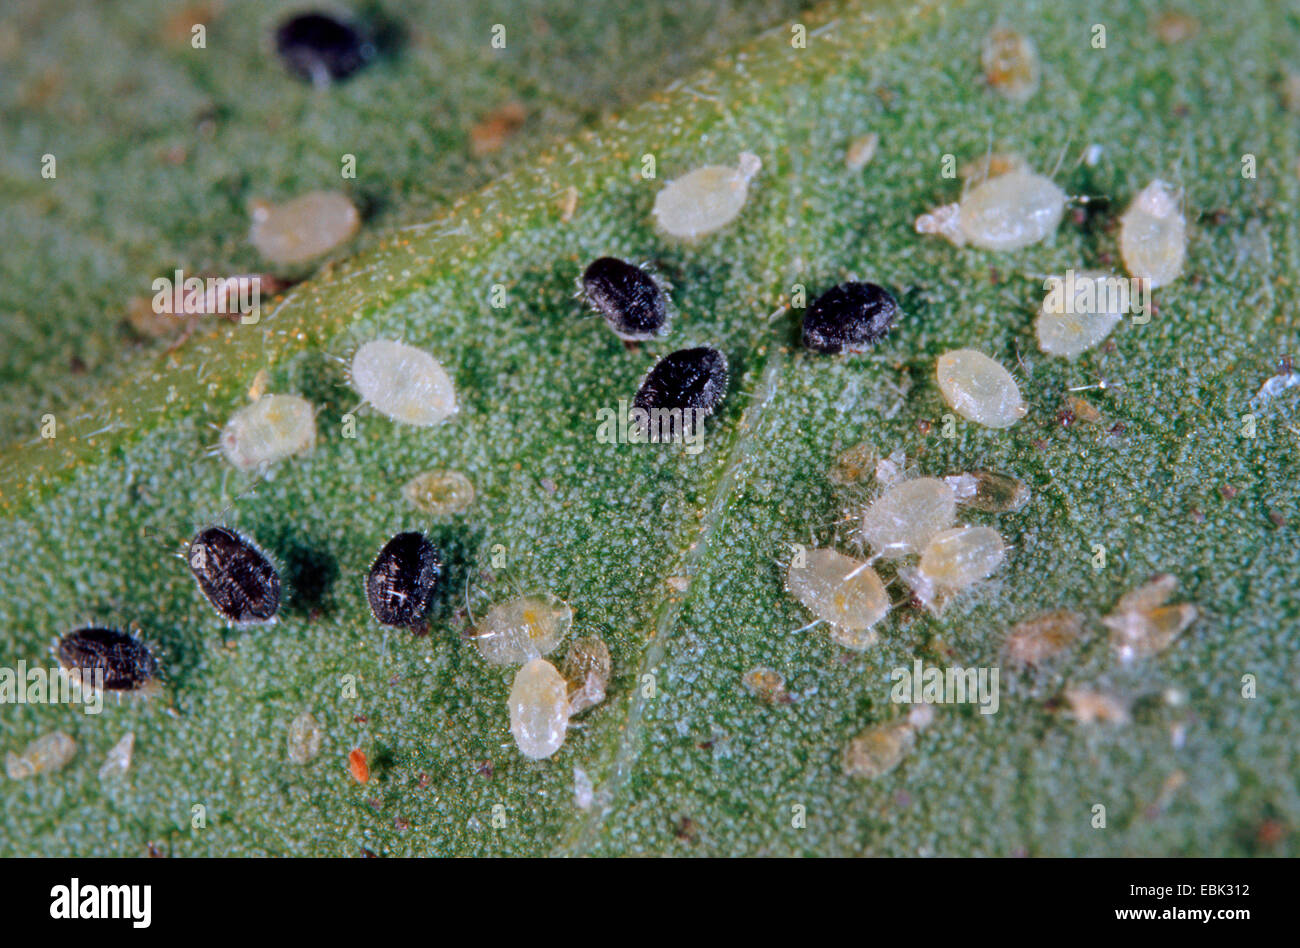 greenhouse whitefly (Trialeurodes vaporariorum), the black larvae with ichneumon fly Encarsia formosa, biological control of pests Stock Photo